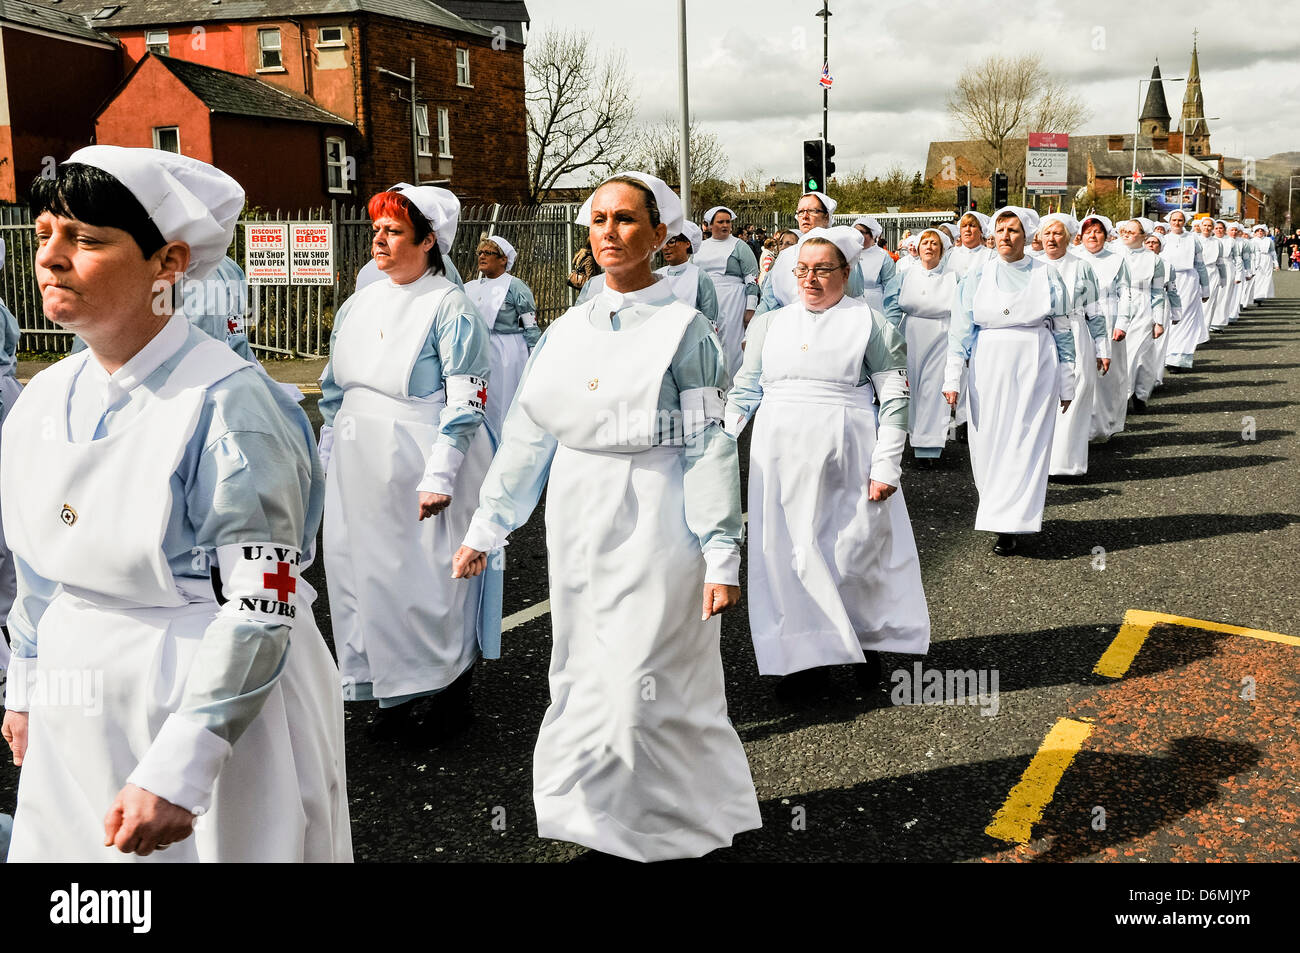 Belfast, Northern Ireland.  20th April, 2013. Women dressed as nurses from 1913 take part in the centenary parade for the founding of the UVF in 1913 Credit: Stepehn Barnes/Alamy Live News Stock Photo